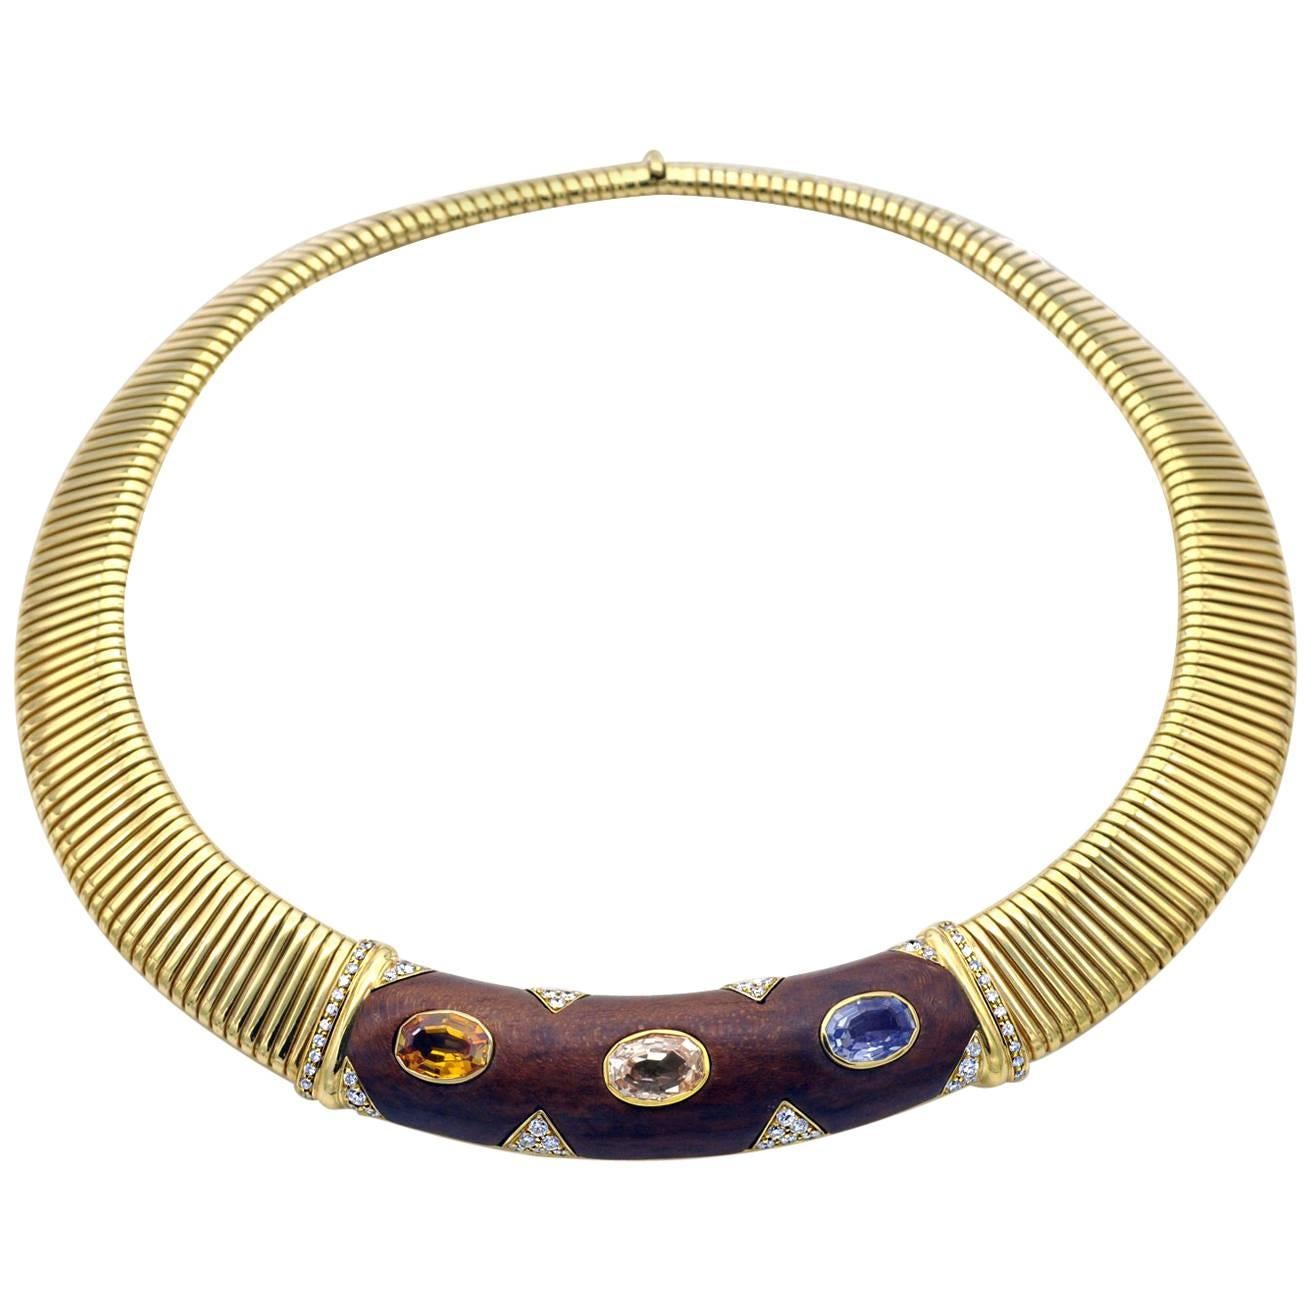 Iconic Gold tubogas necklace. the central element is inlayed with wood, in which a yellow sapphire a soft pink sapphire and a blue sapphire are set . Elegantly placed white diamonds highlight the whole necklace. This choker is excessively well made